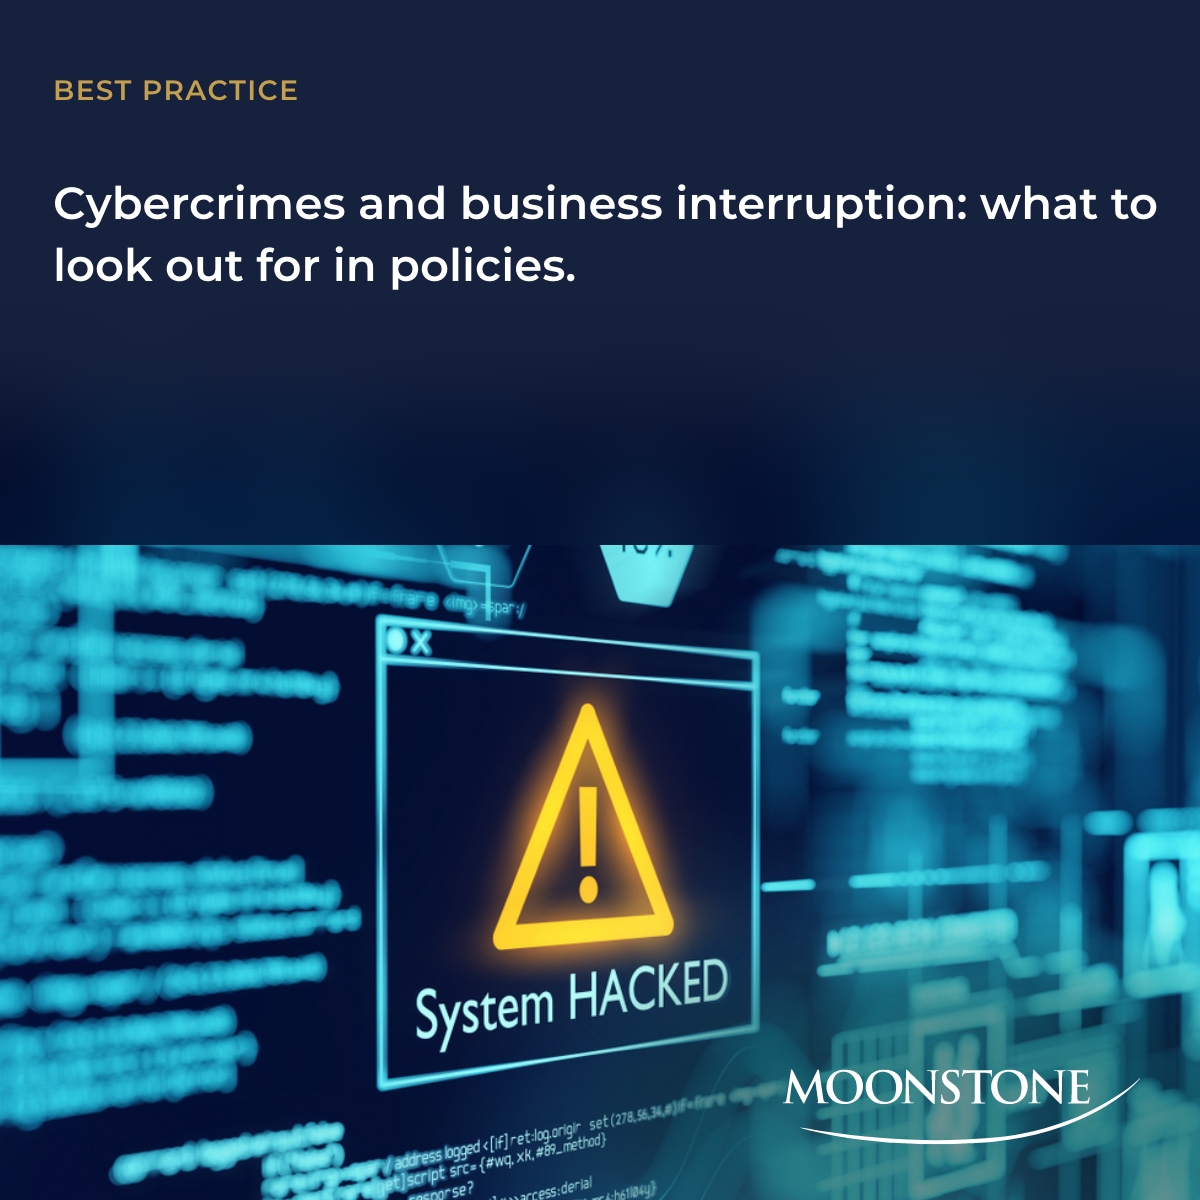 Why an all-risks clause may not provide cover for business interruption related to cybercrime. bit.ly/3y81VJy 
#allrisks #businessinterruption #cyberattack #cybercrime #indemnityperiods #insurance #ransomware #thirdpartyliability #timedeductibles #WerksmansAttorneys